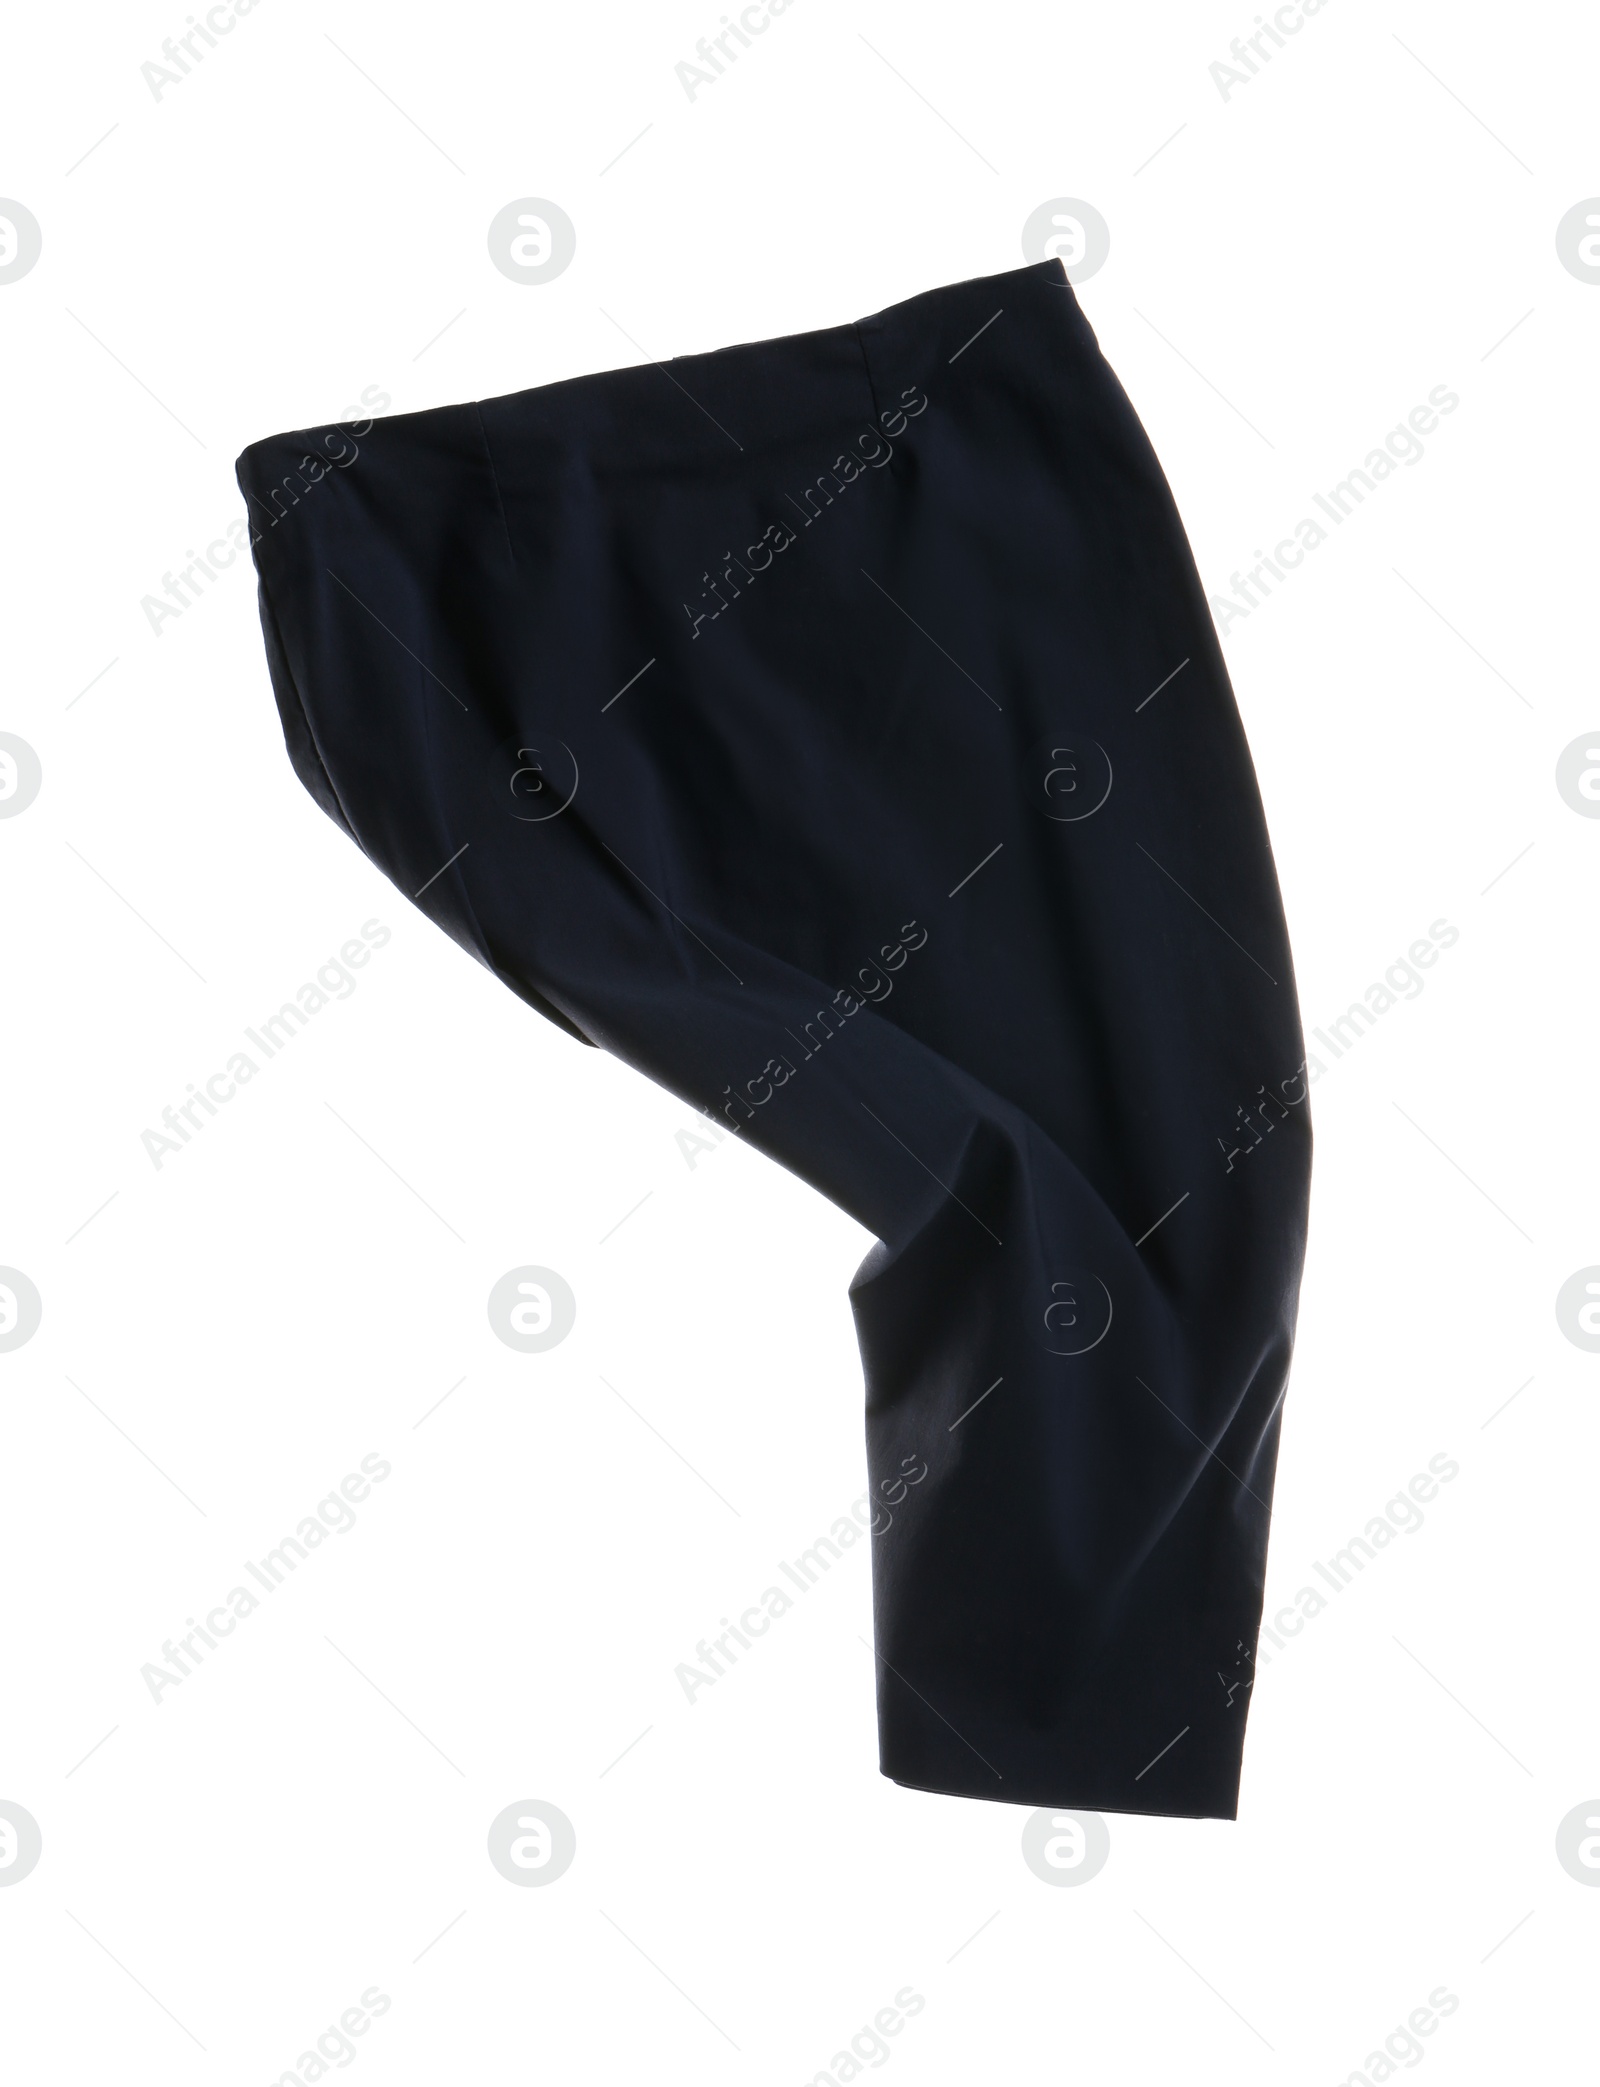 Photo of Rumpled black skirt isolated on white. Messy clothes